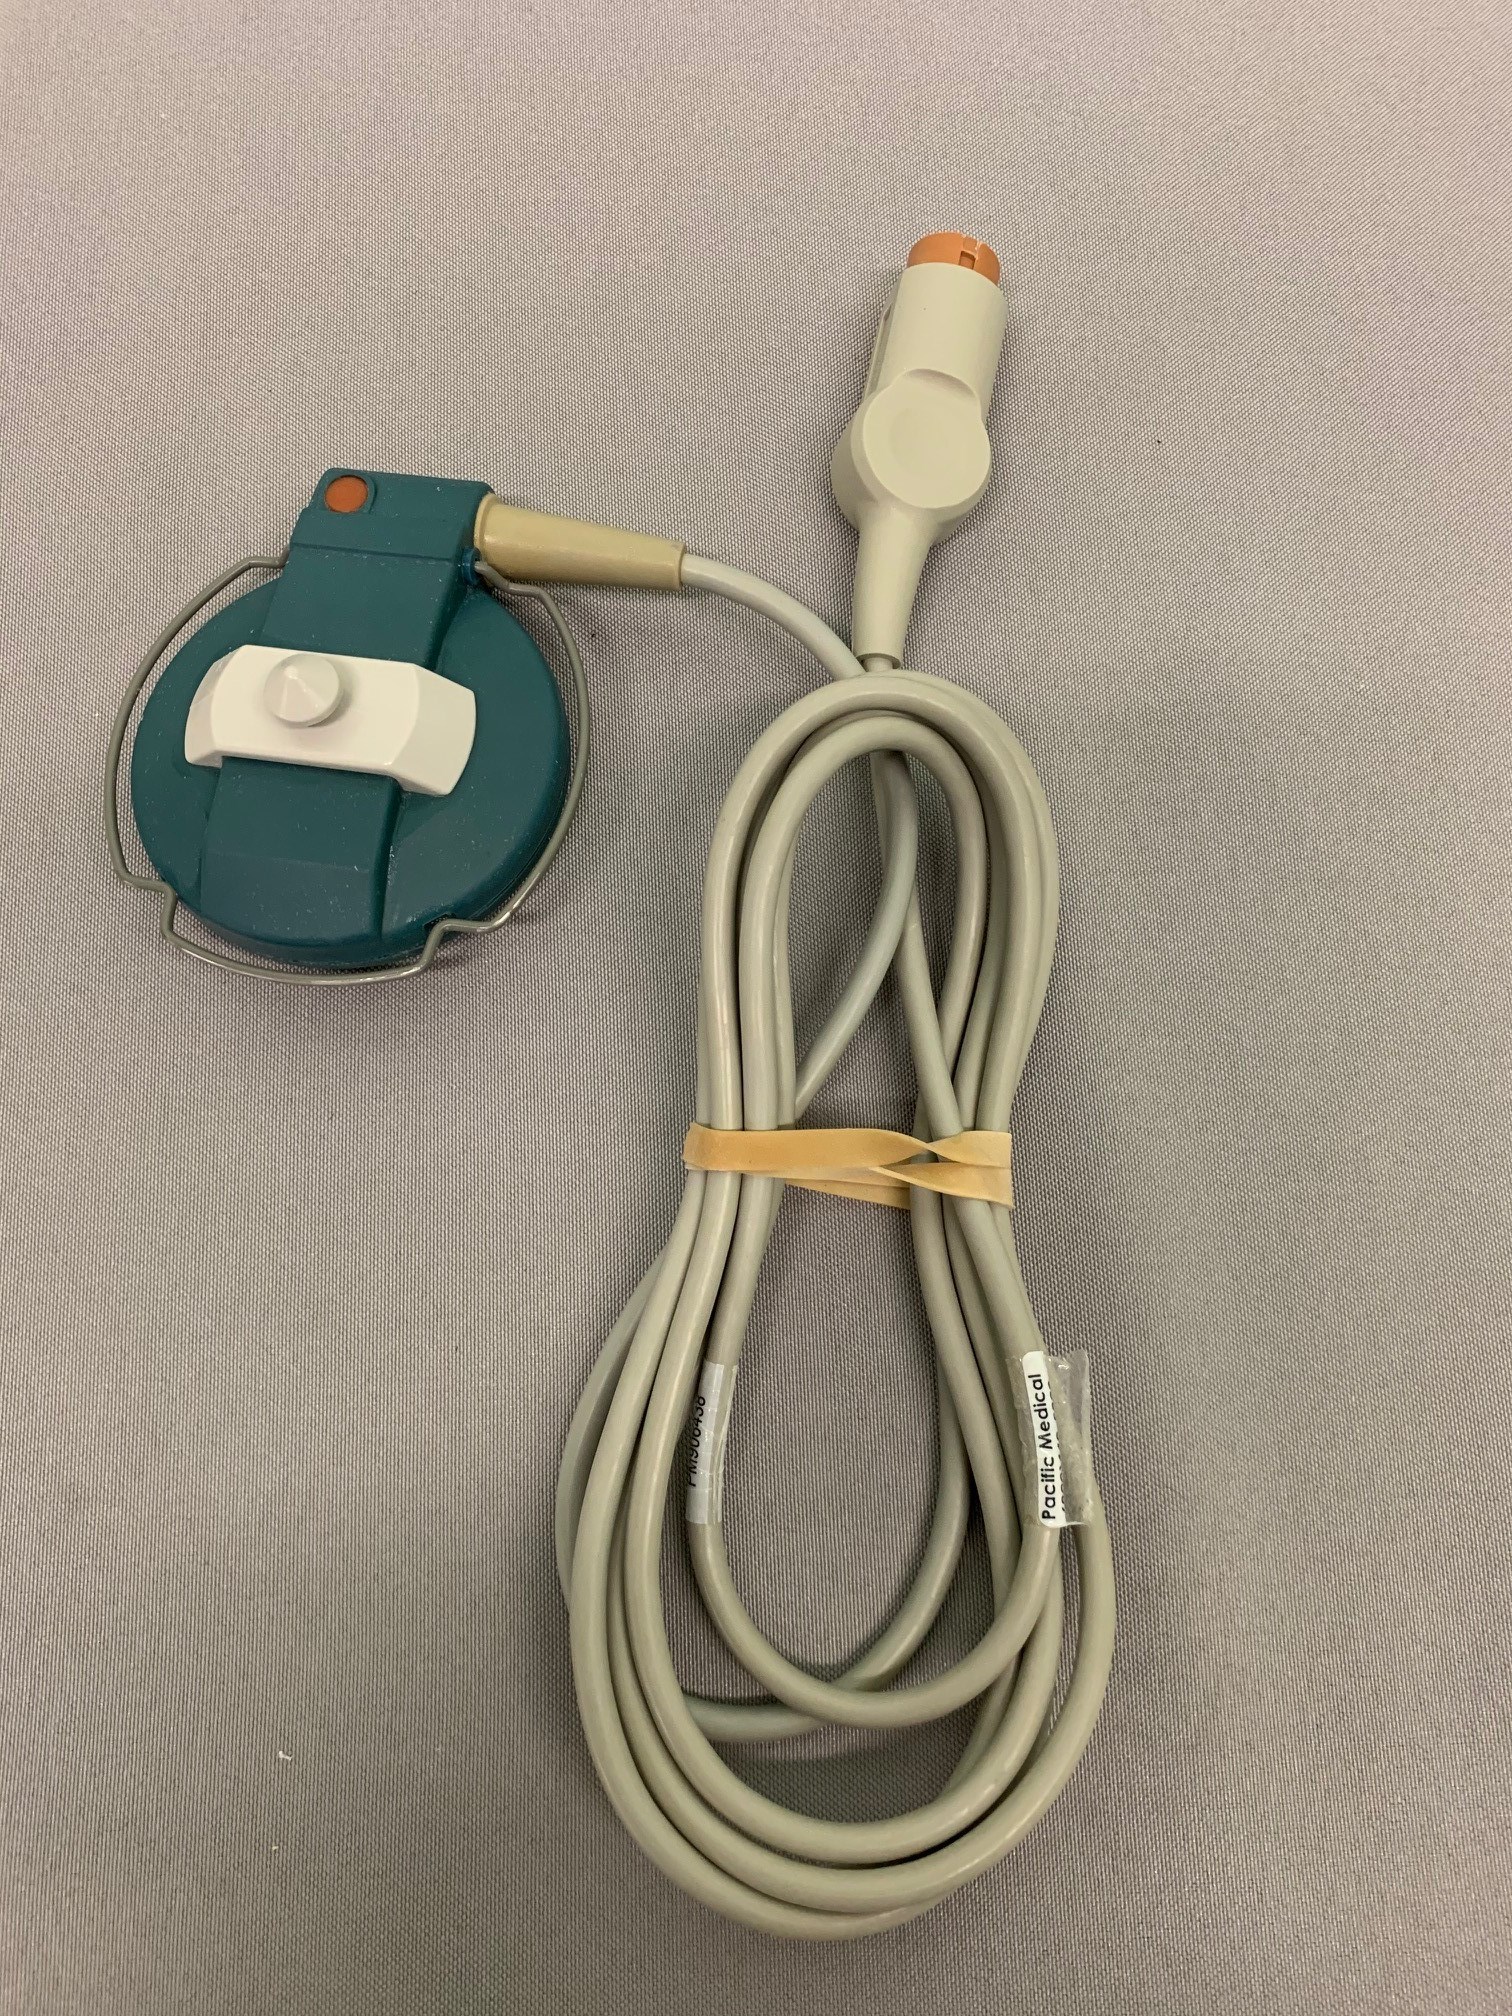 OTHER Neonatal Ultrasound Transducer - PM906438